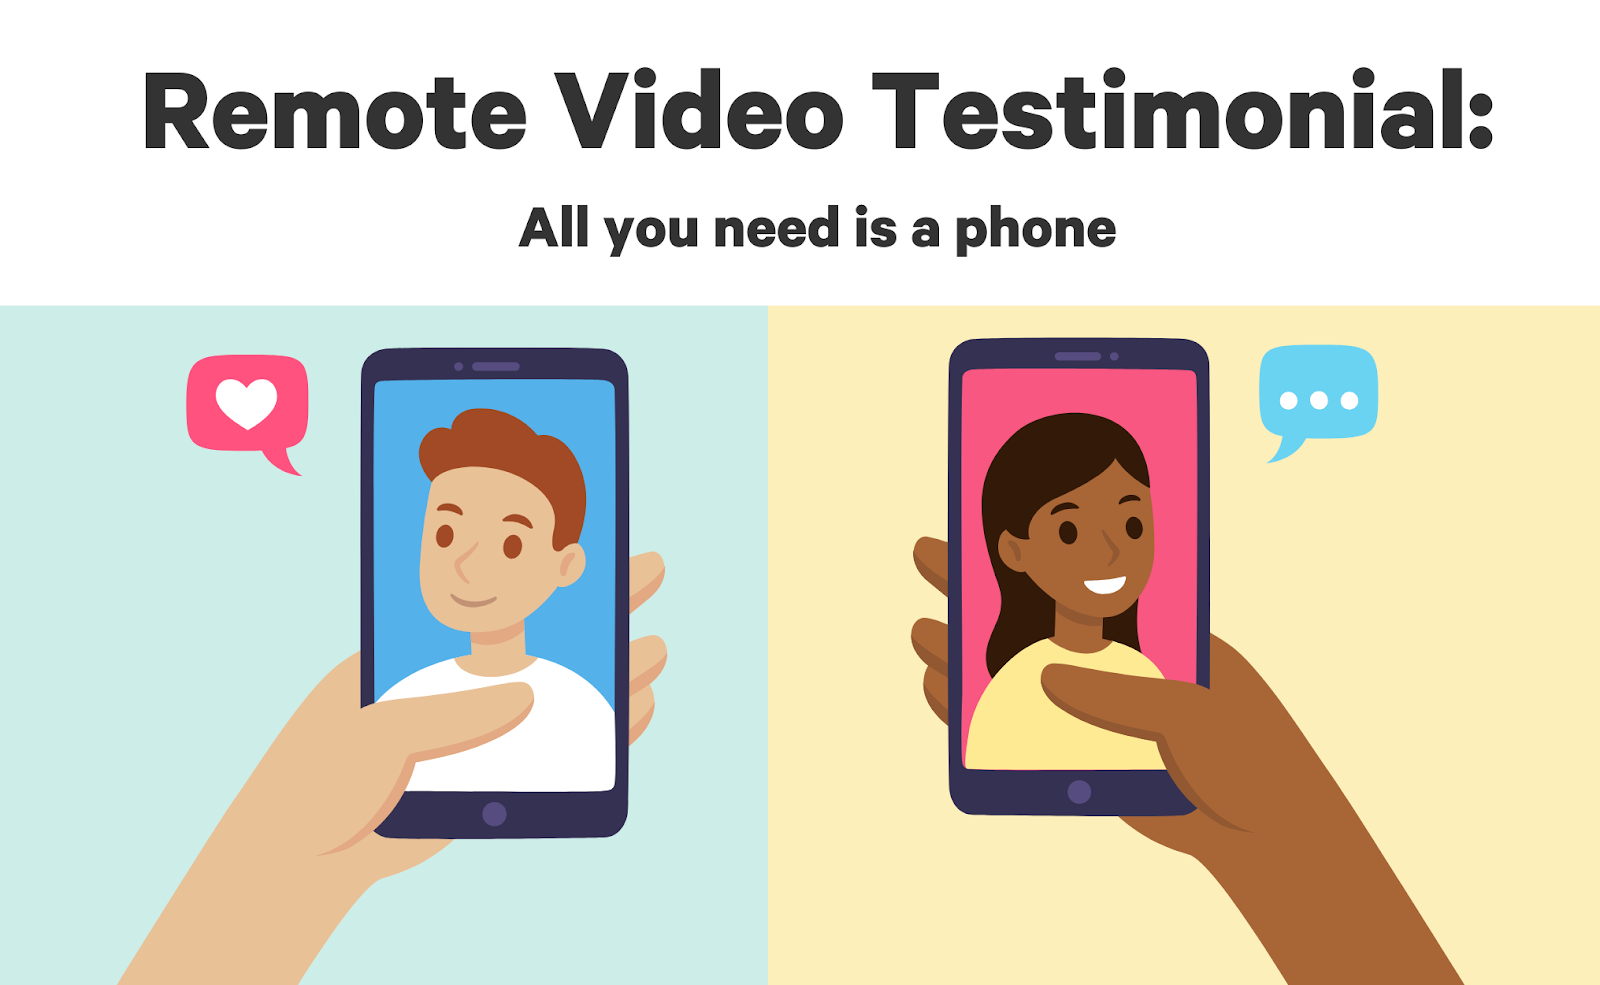 remote video testimonial with phone